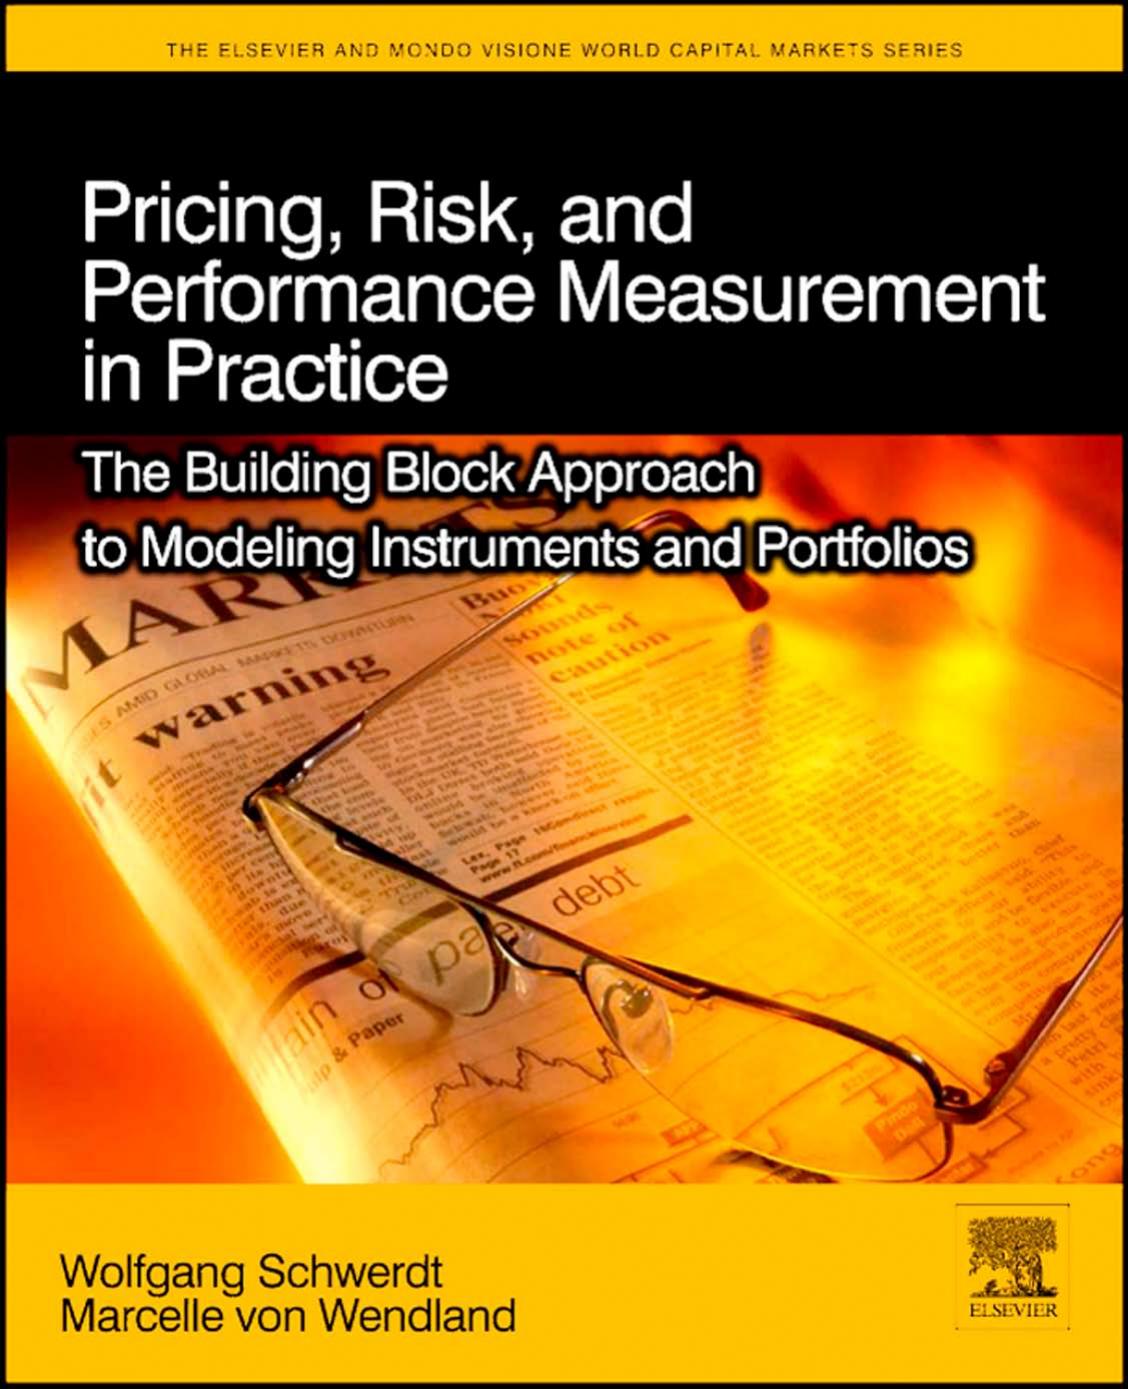 ebooksclub.org  Pricing  Risk  and Performance Measurement in Practice  The Building Block Approach to Modeling Instruments and Portfolios  The Elsevier and Mondo Vis 2010